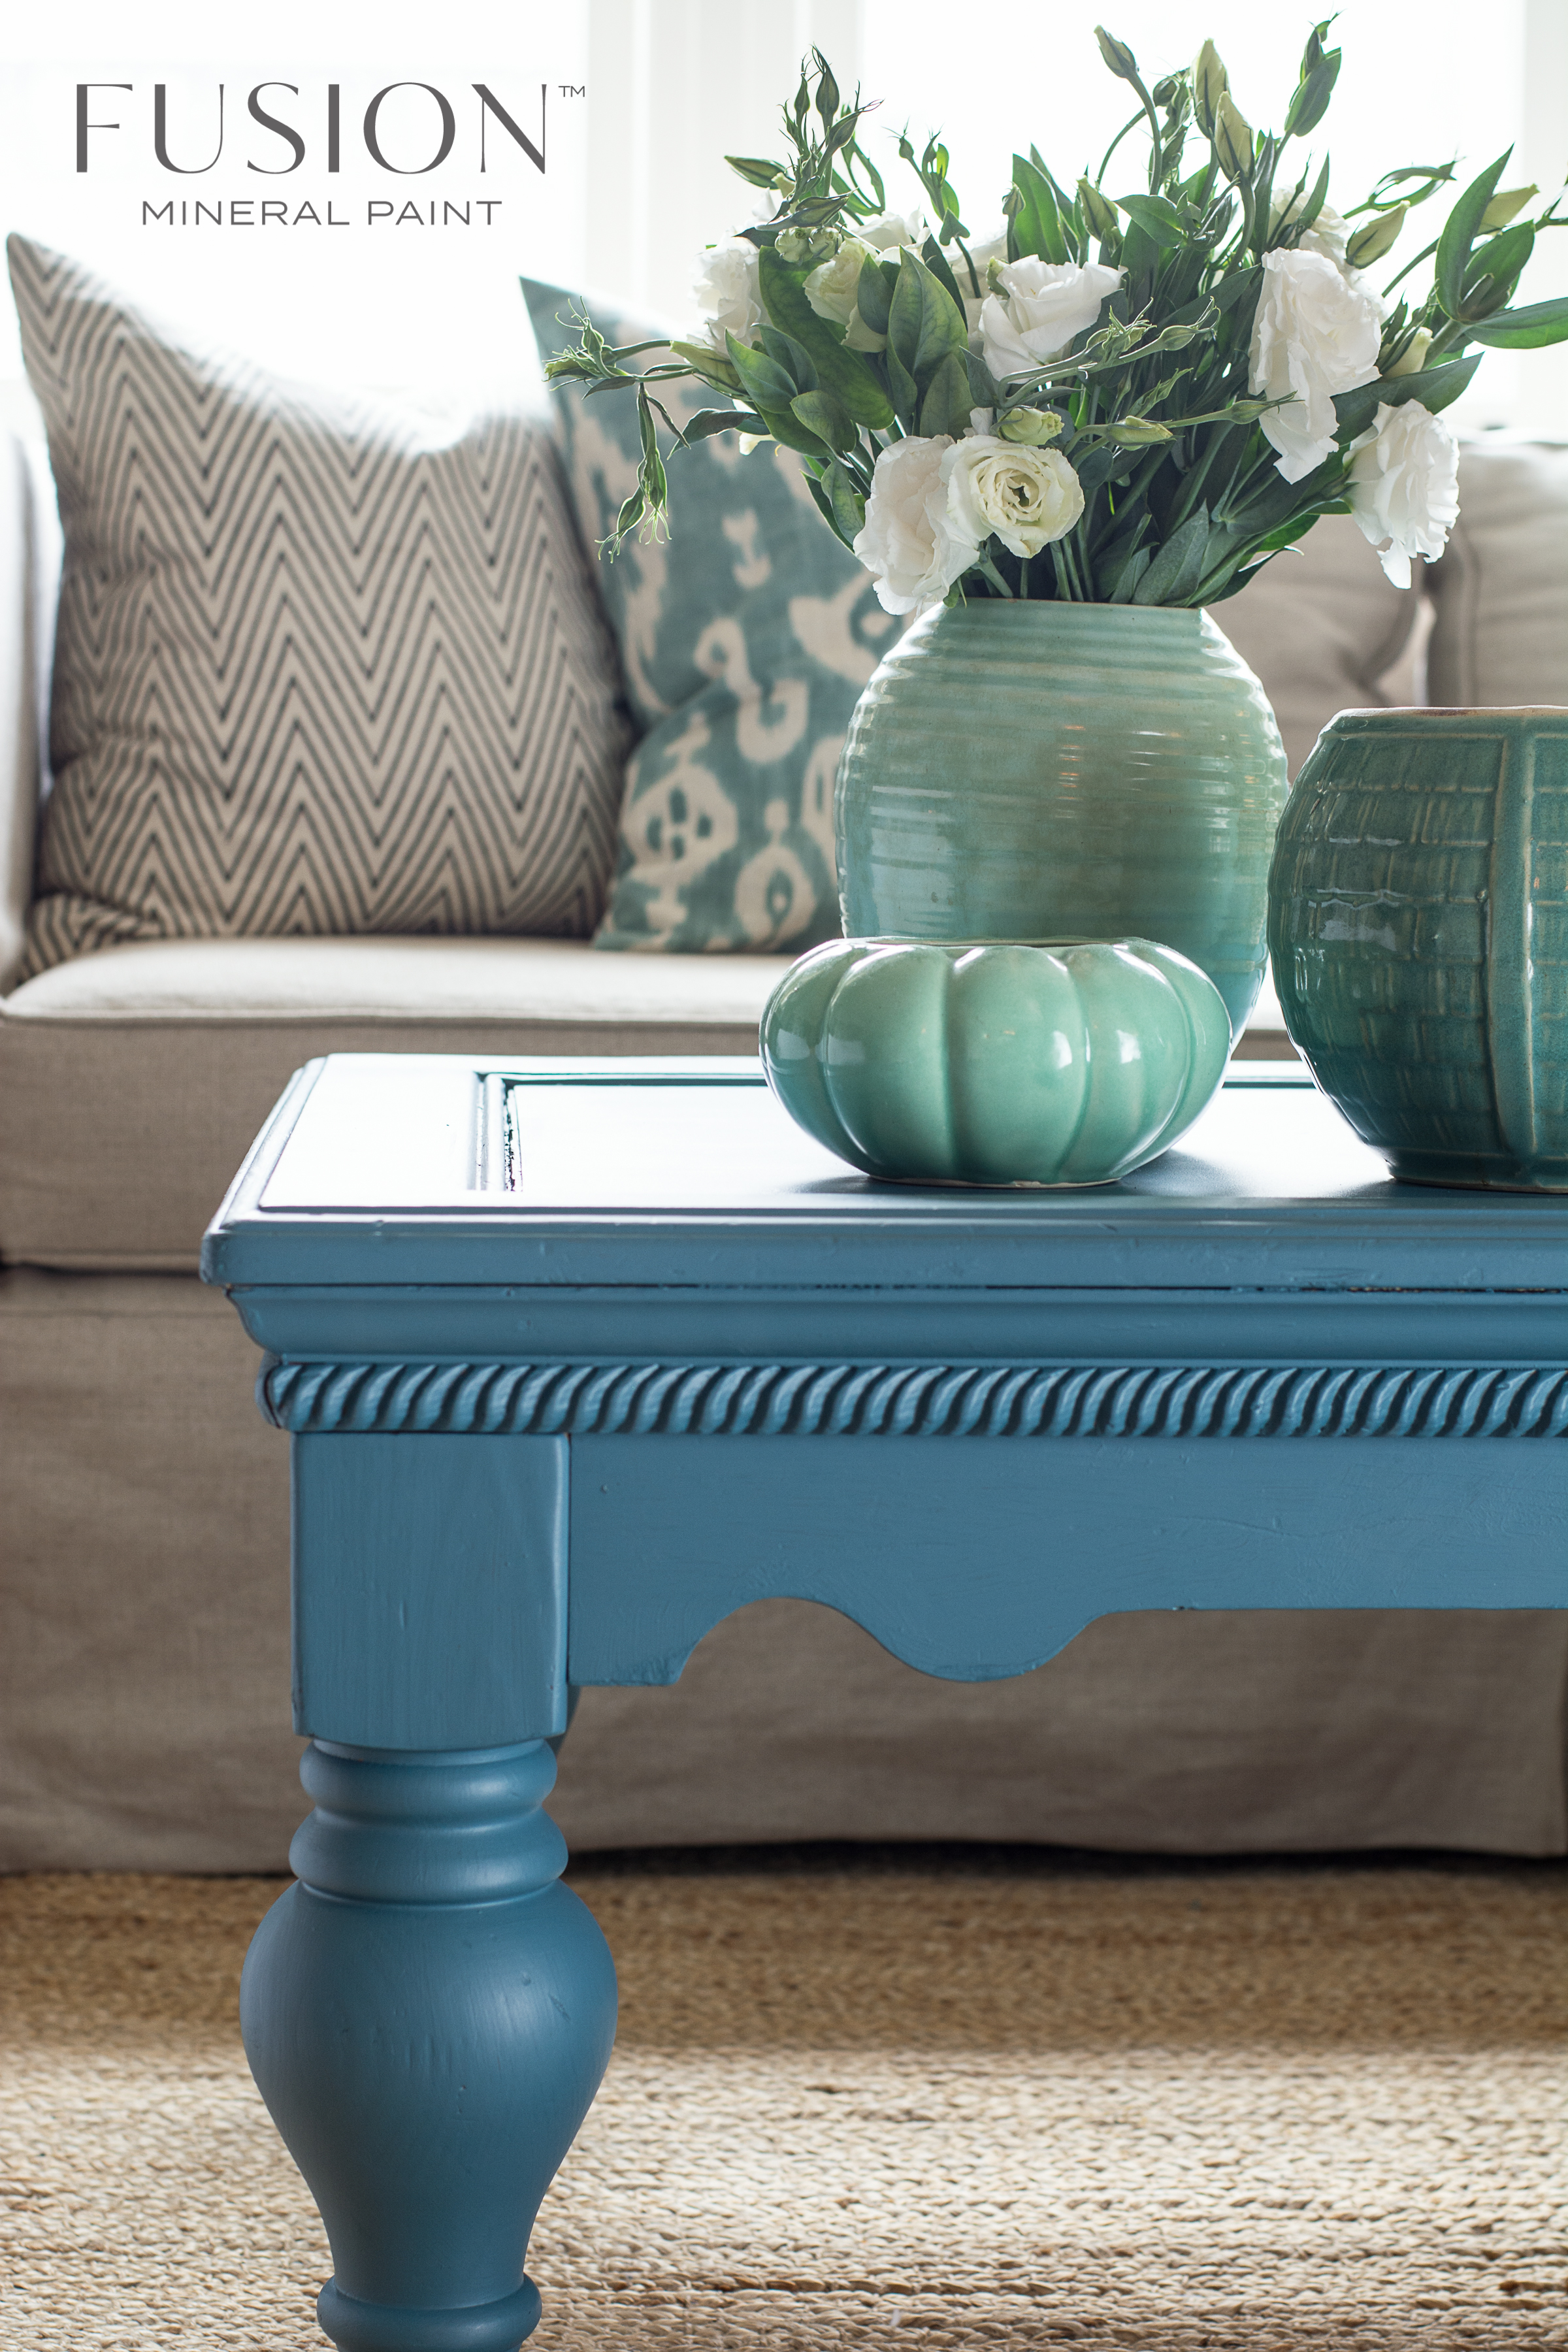 Seaside Fusion Mineral Paint Goed Gestyled Brielle